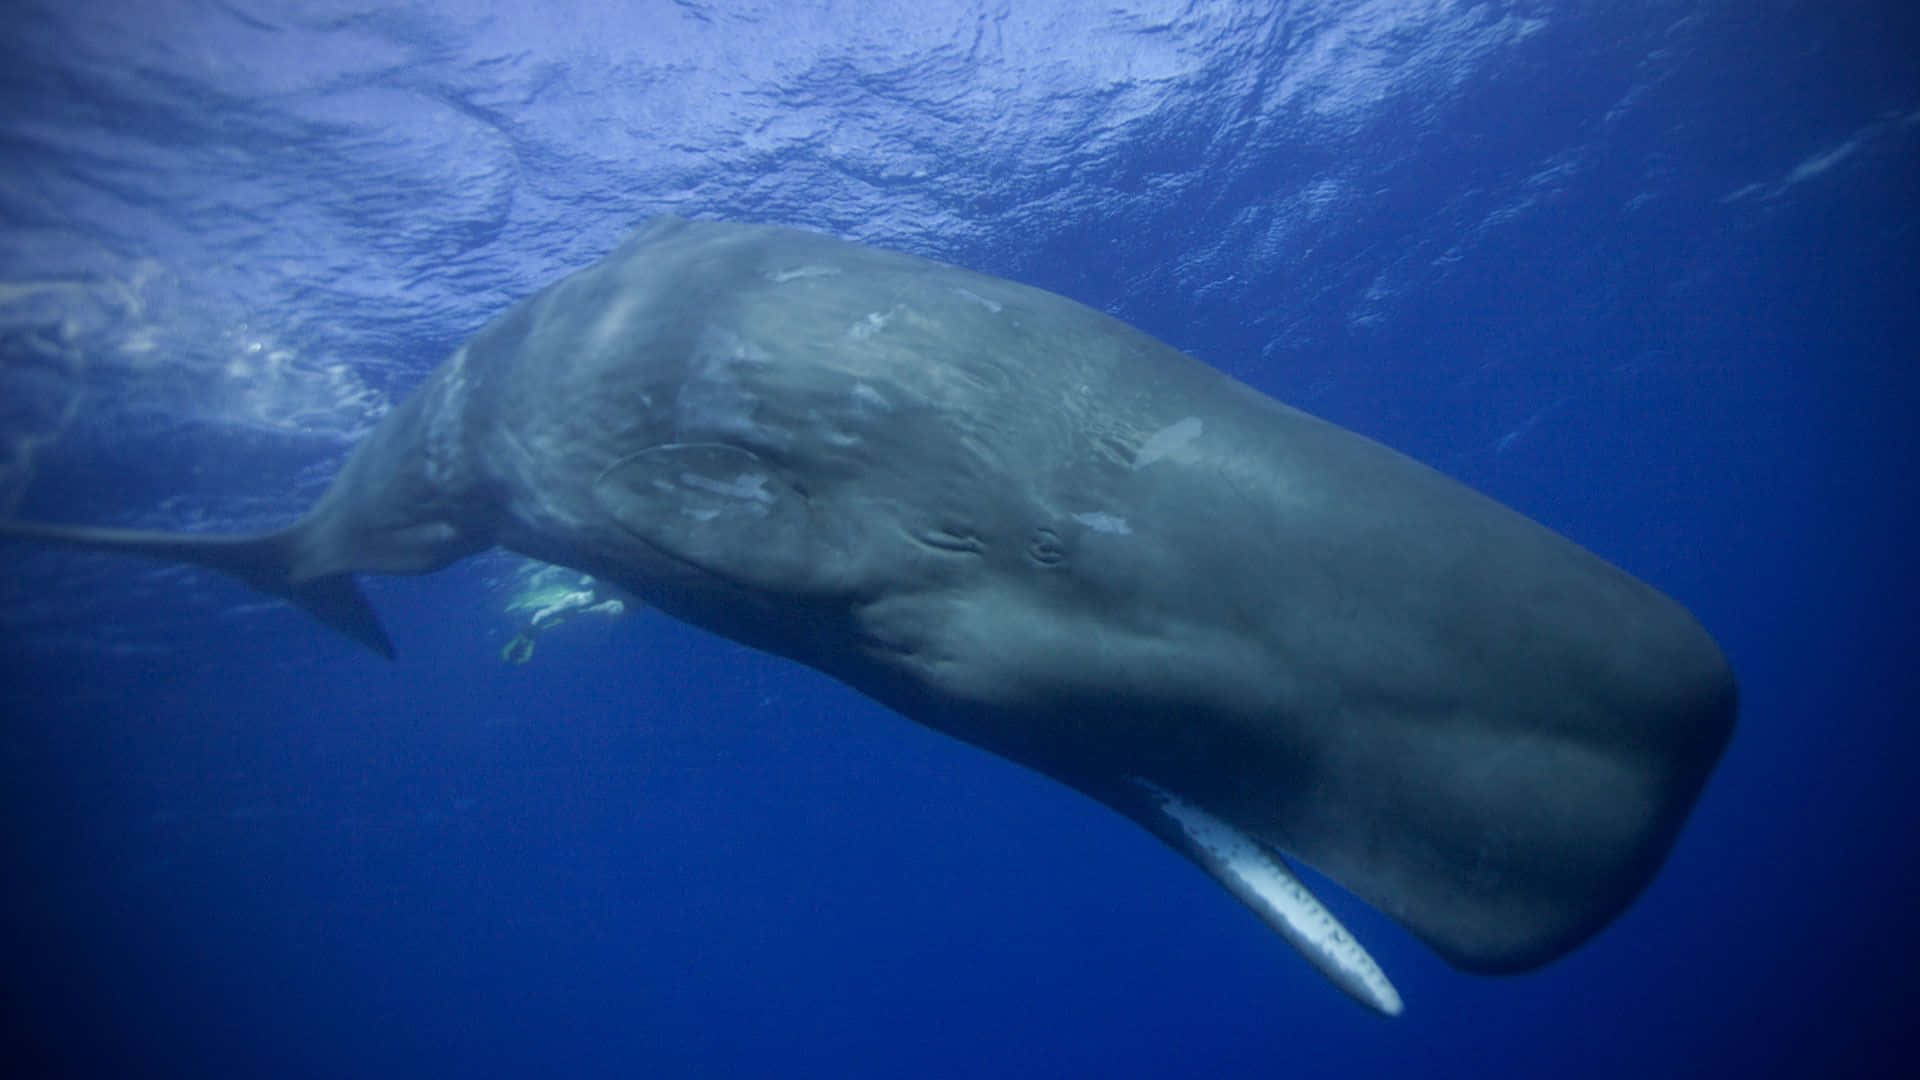 A lively sperm whale breaching the ocean surface